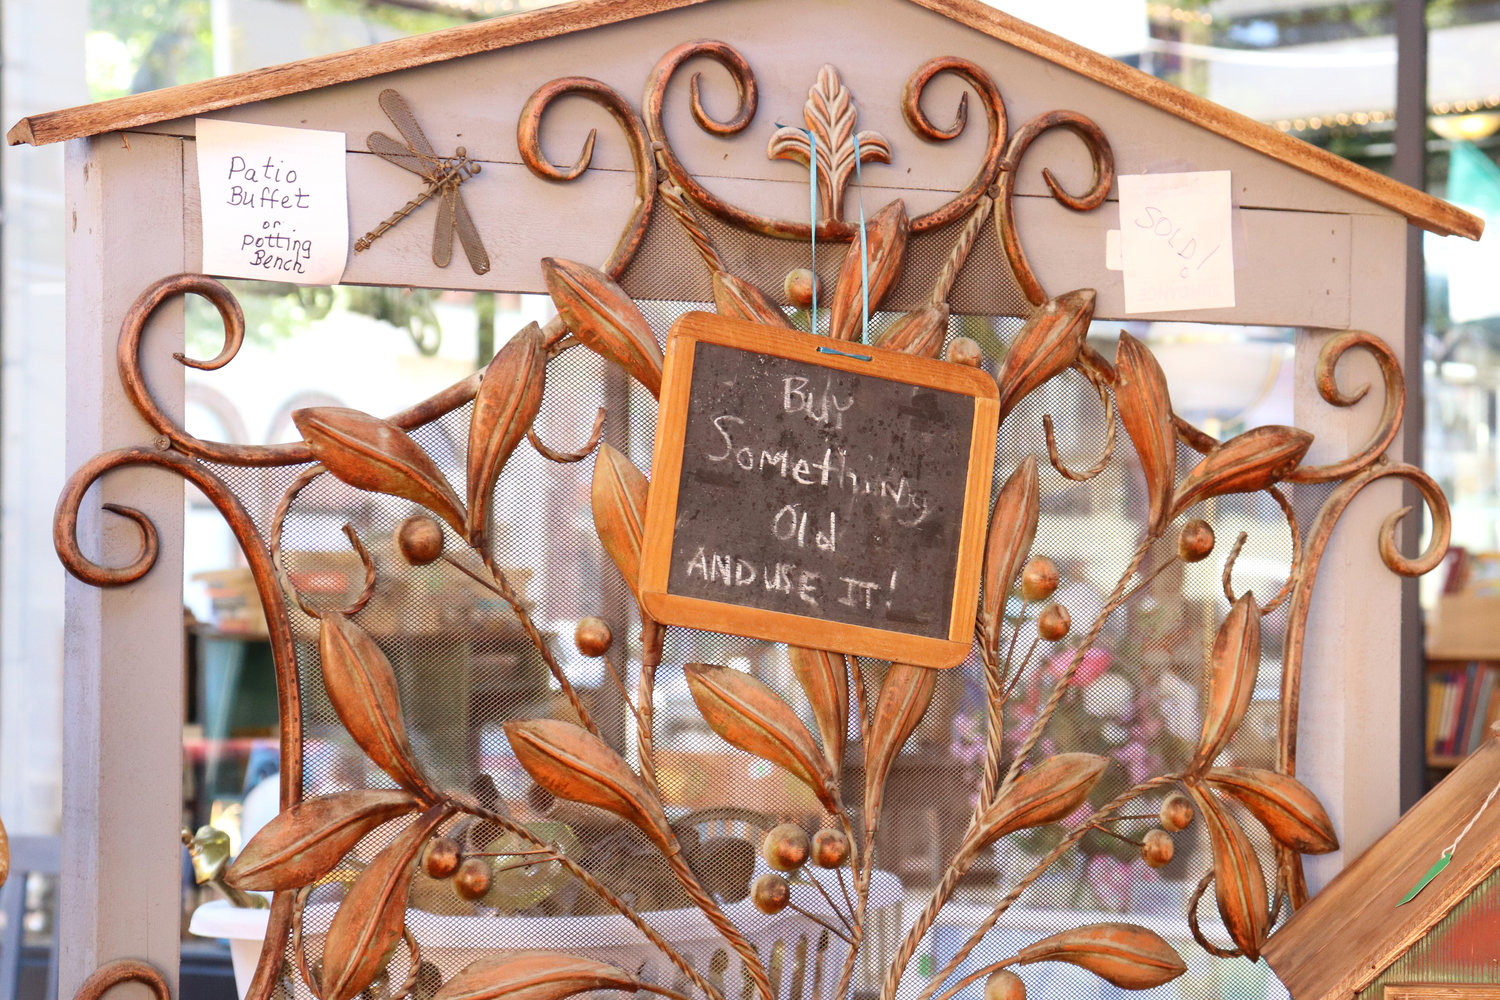 A sign reading “Buy Something Old and Use It!” hangs on a sold “patio buffet or potting bench” at a stall during Antique Fest in downtown Centralia on Sunday.